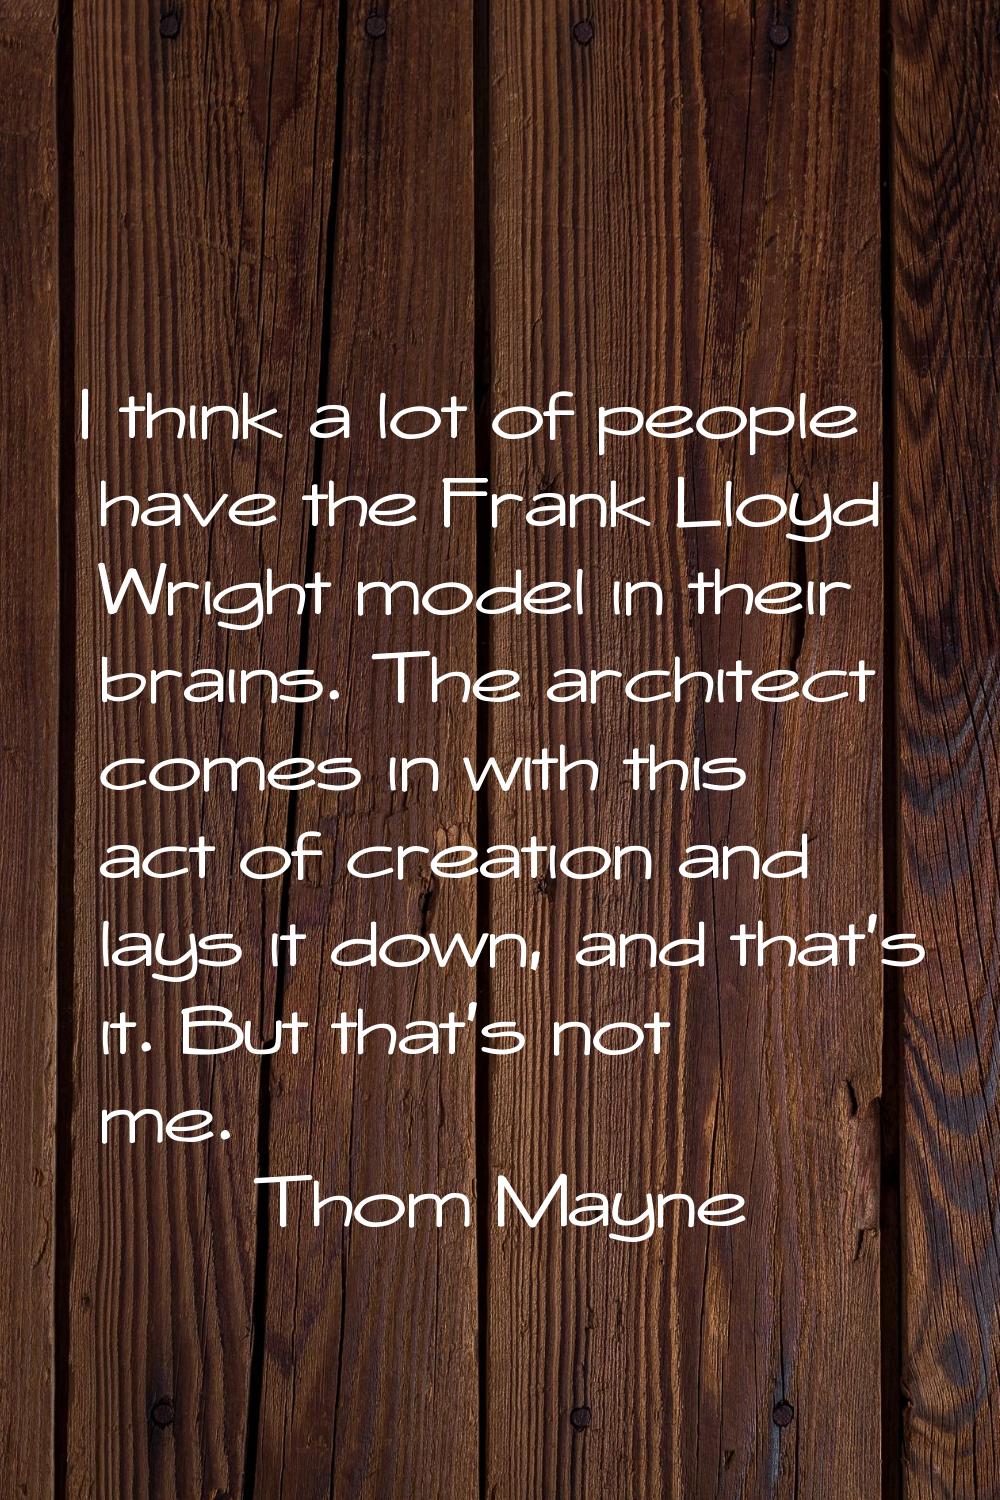 I think a lot of people have the Frank Lloyd Wright model in their brains. The architect comes in w